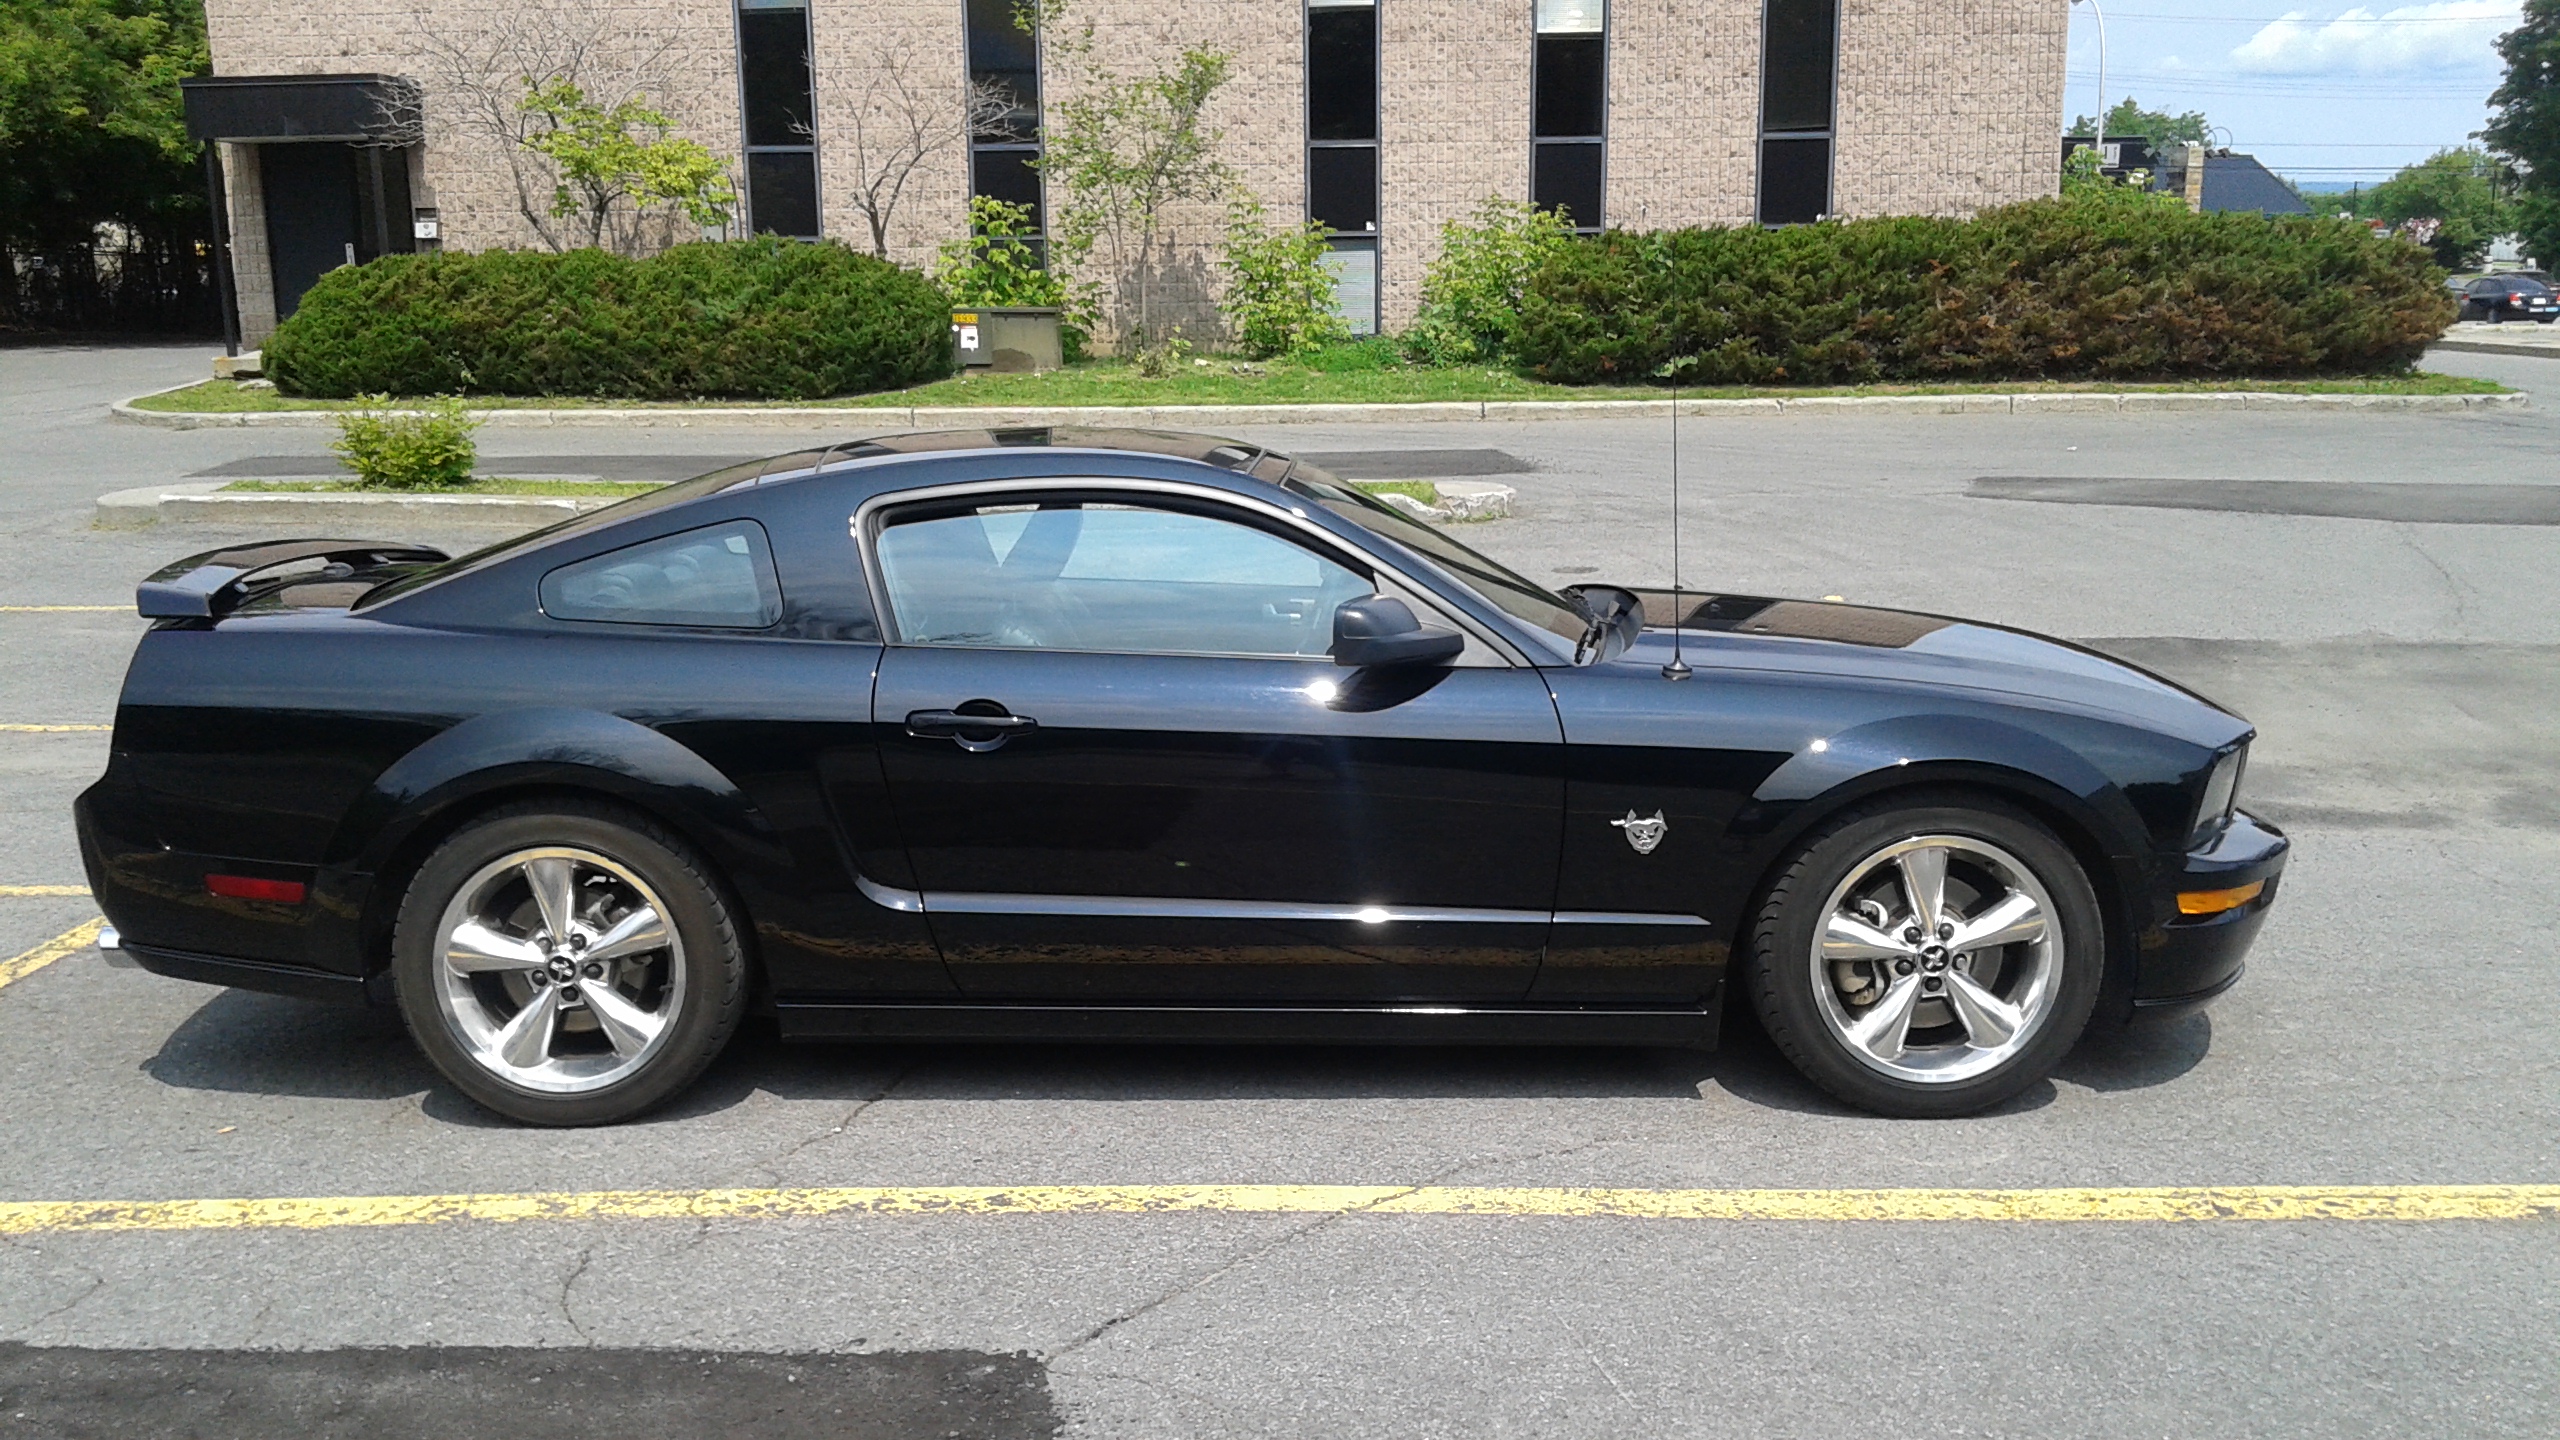 2009 Mustang GT for sale  Canadian Mustang Owners Club  Ford Mustang Forums